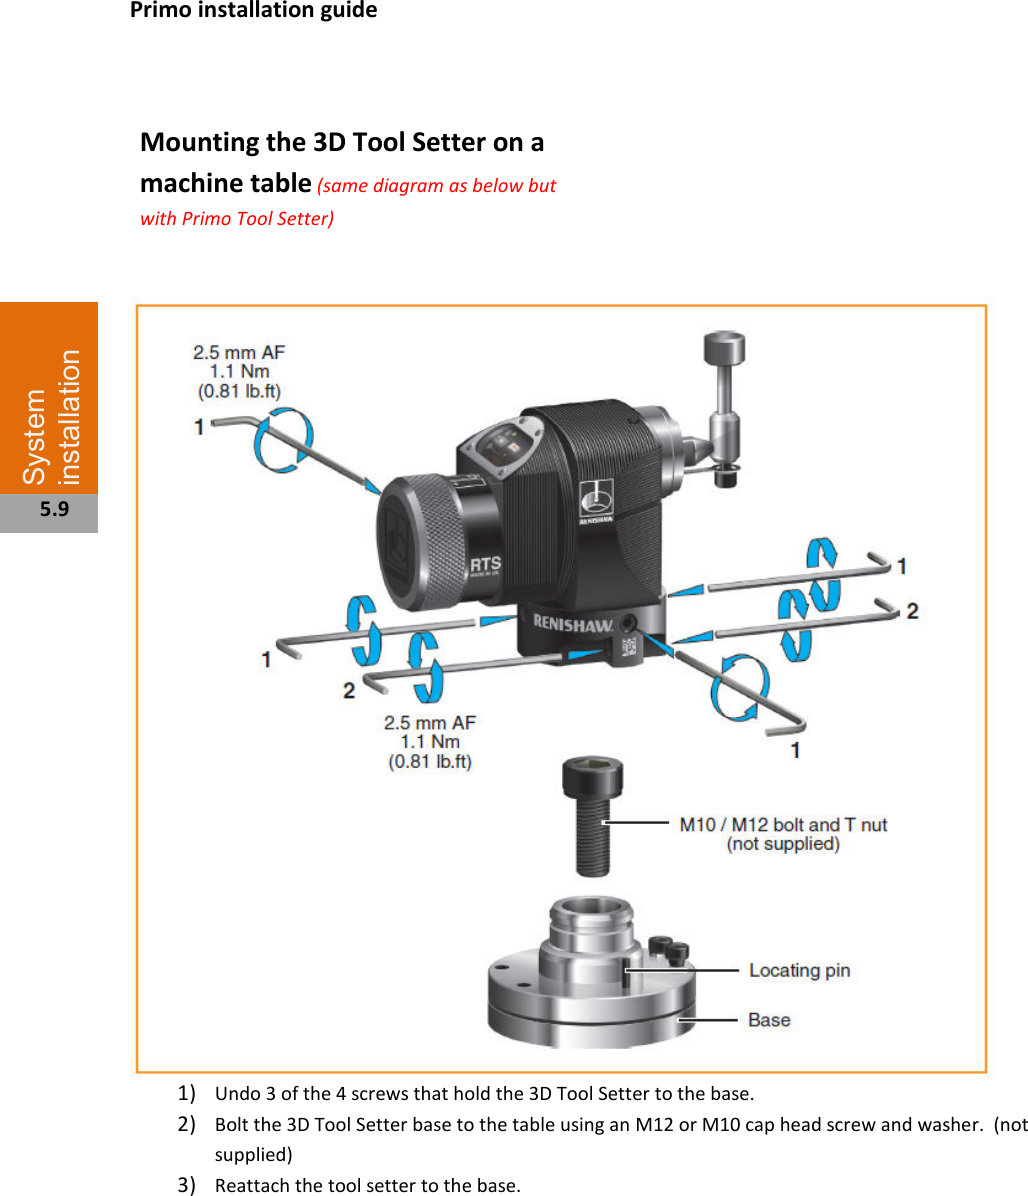    Mounting the 3D Tool Setter on a machine table (same diagram as below but with Primo Tool Setter)                     1) Undo 3 of the 4 screws that hold the 3D Tool Setter to the base. 2) Bolt the 3D Tool Setter base to the table using an M12 or M10 cap head screw and washer.  (not supplied) 3) Reattach the tool setter to the base.             System installation  5.9 Primo installation guide 